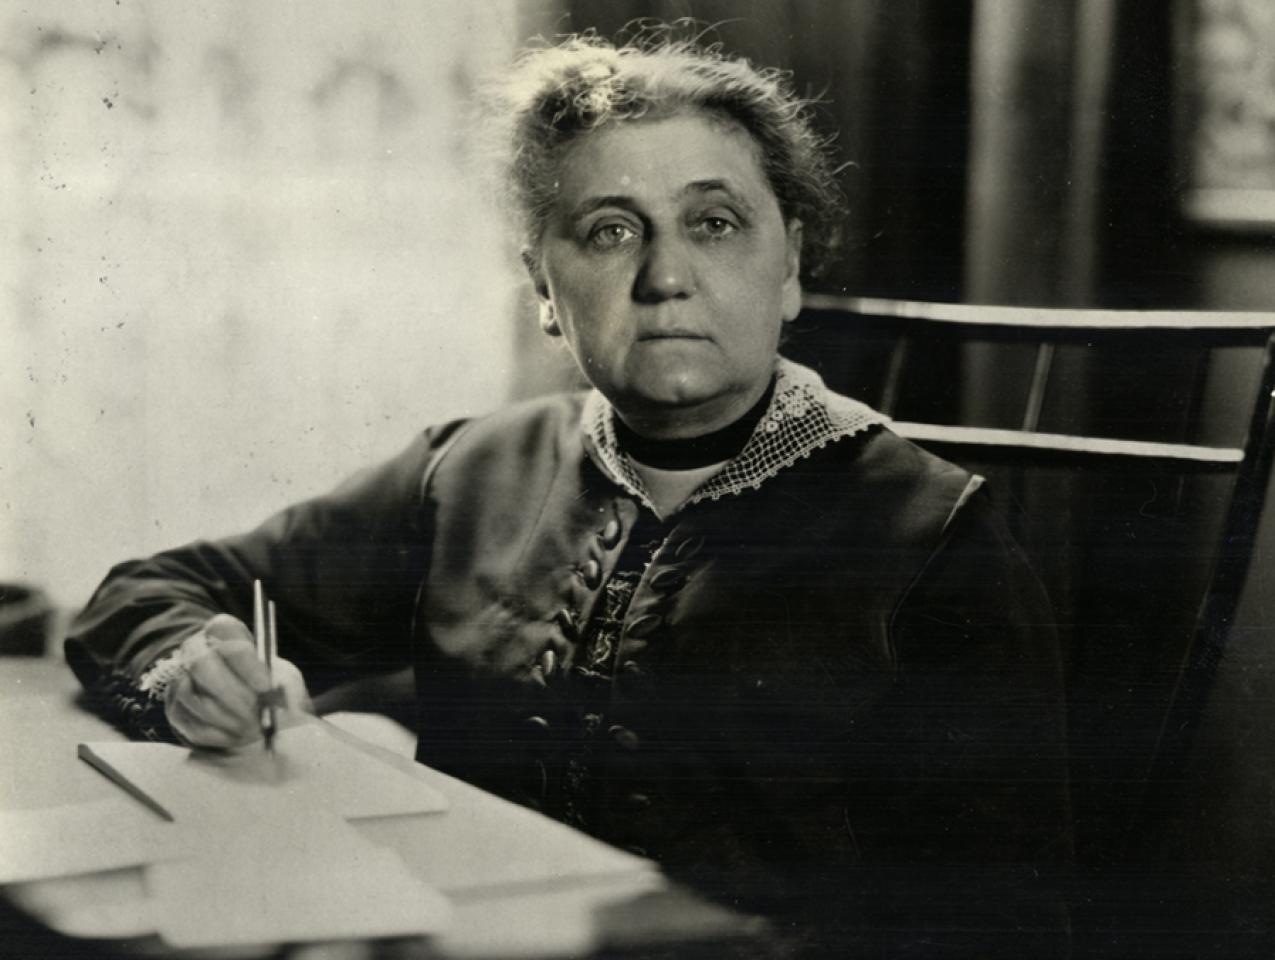 Portrait of Jane Addams sitting at her writing desk with pen in hand